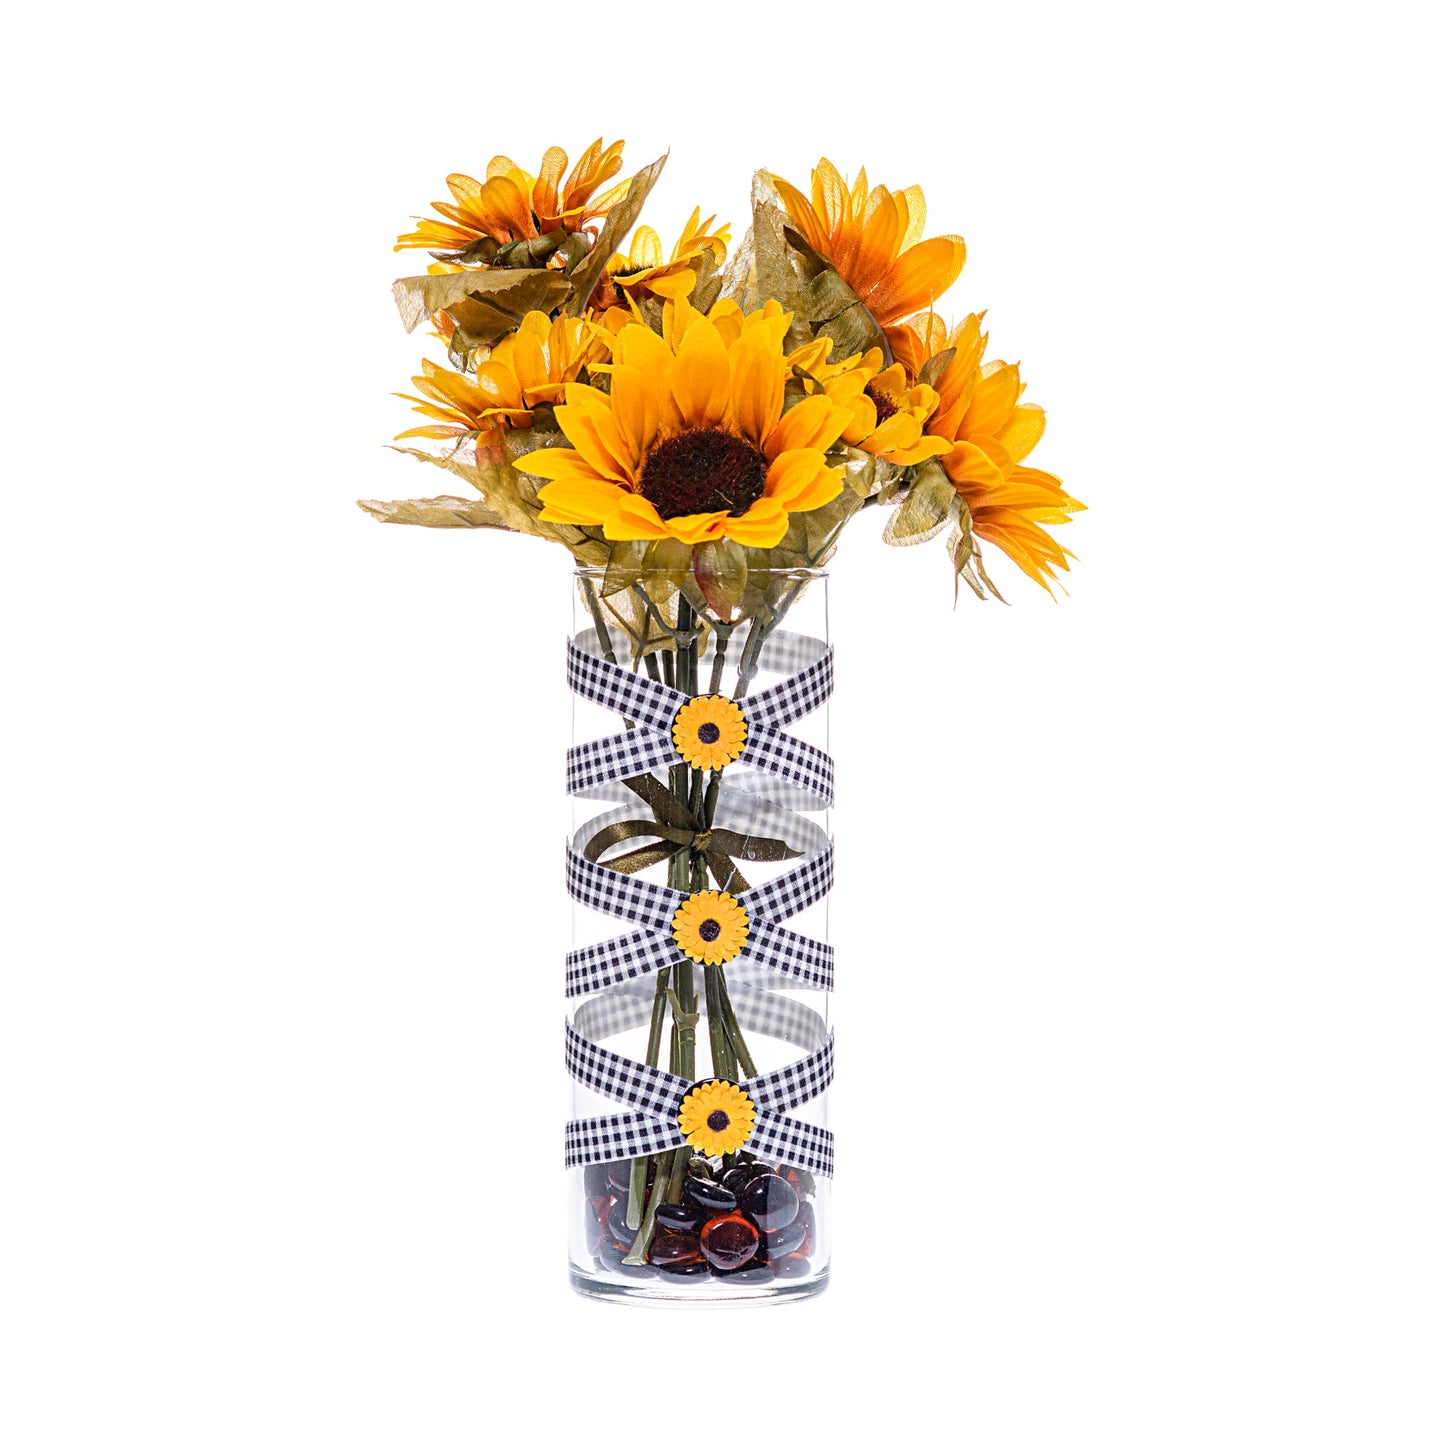 Front of Glass Wrappings 10" glass bud vase wrapped in black & white check elastic, decorated with 3 small sunflowers and filled with a bouquet of sunflowers.